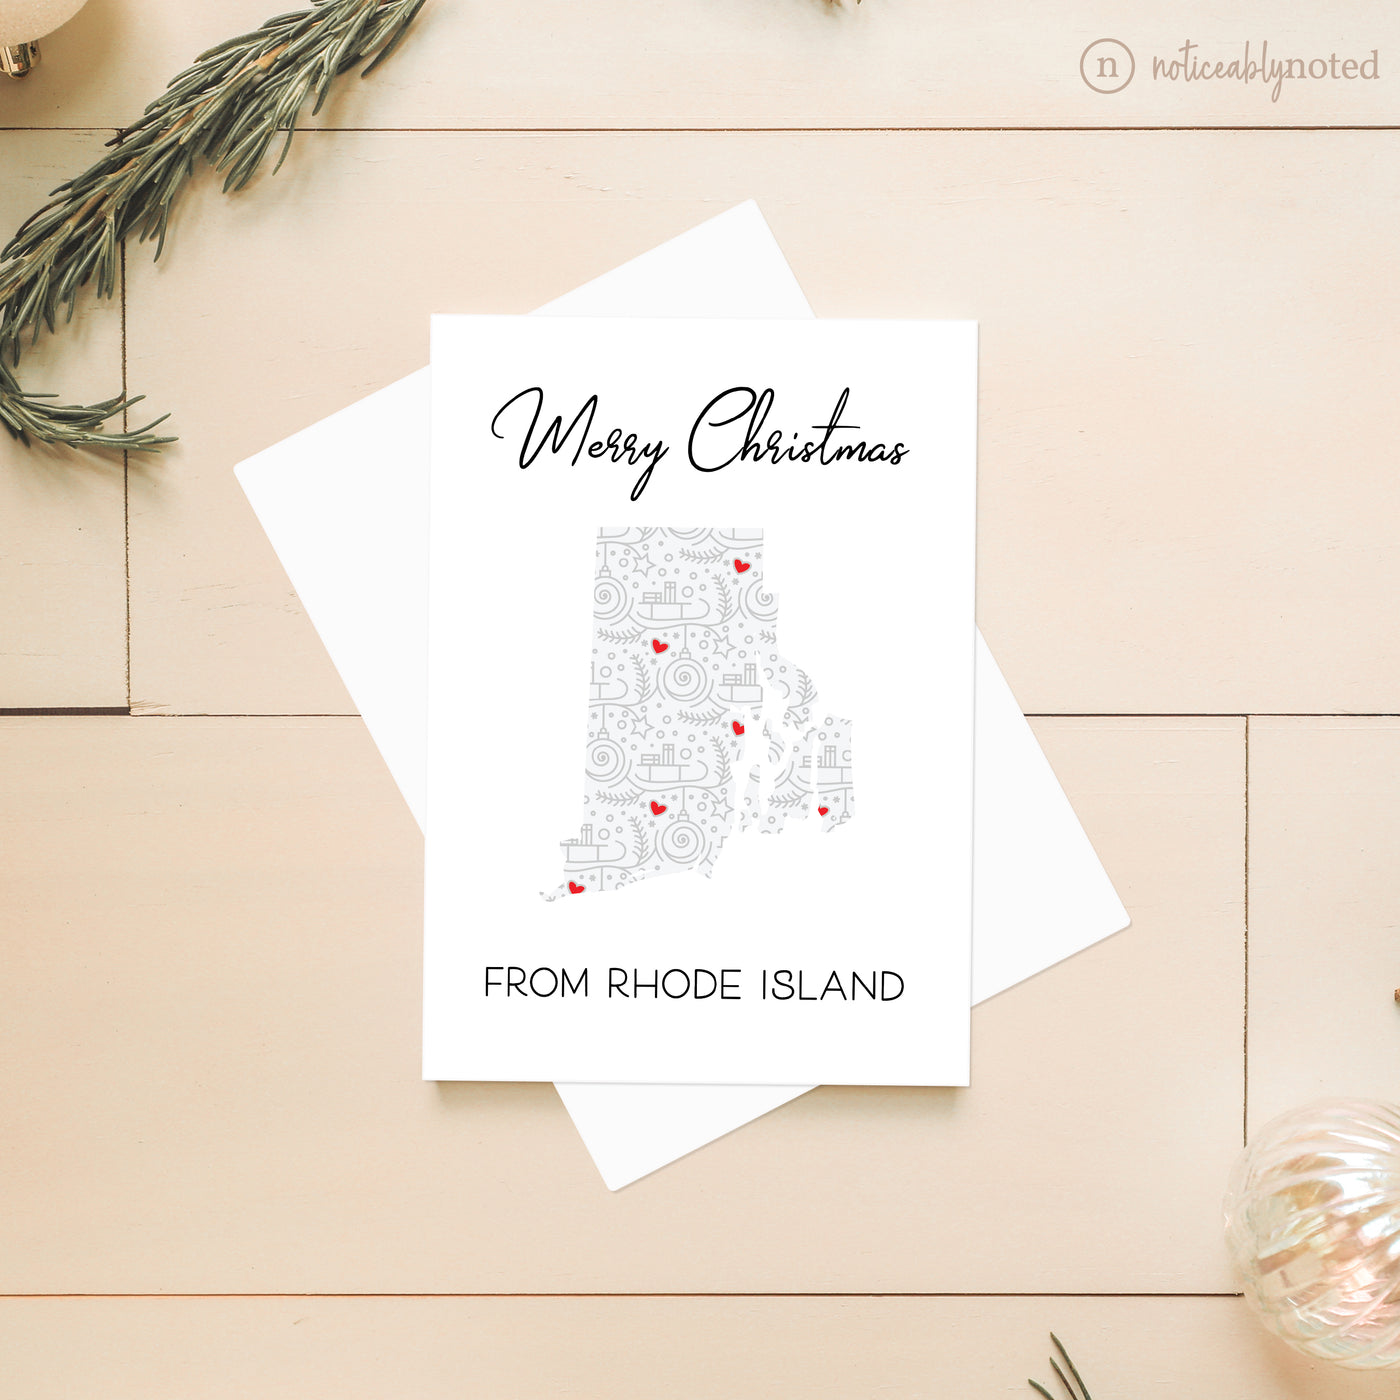 RI Holiday Greeting Cards | Noticeably Noted